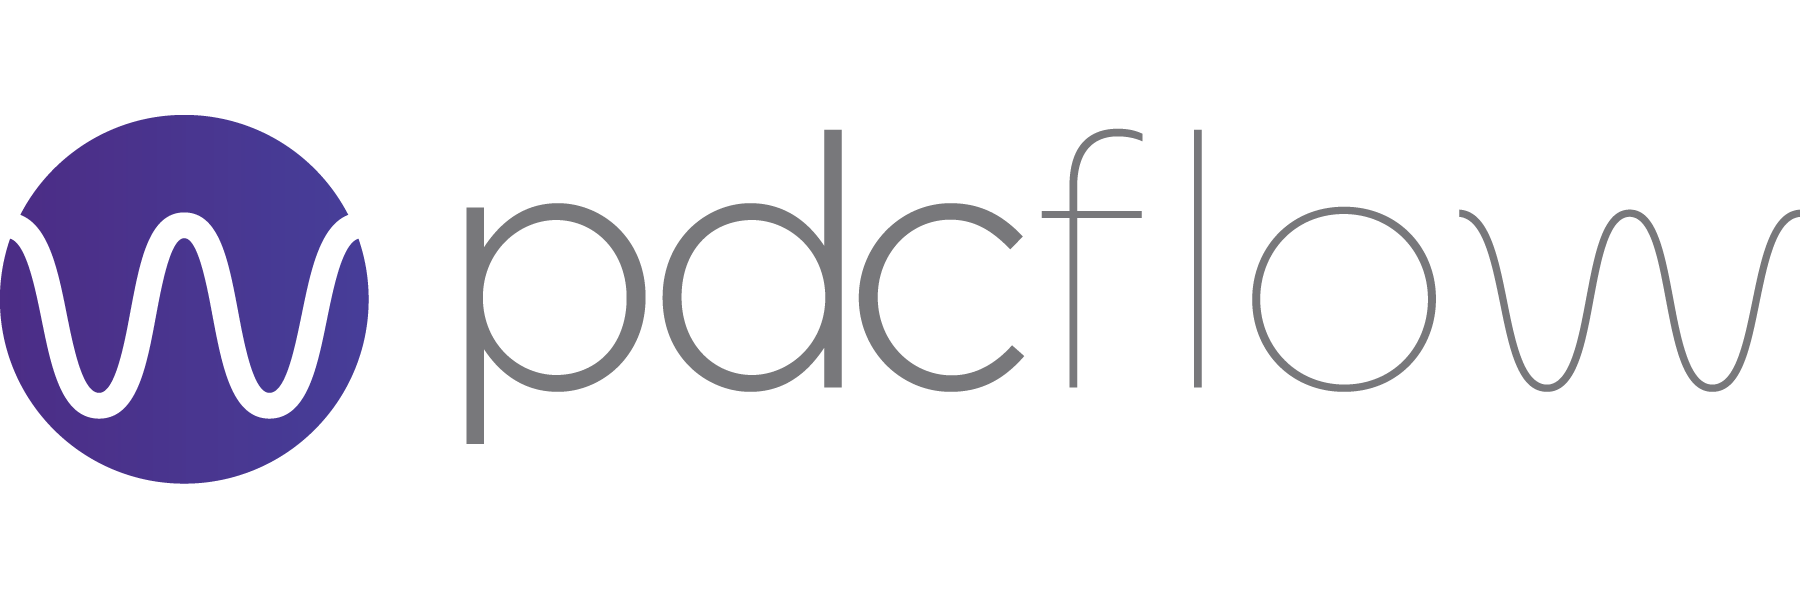 pdcflow_logo_horizontal_full_color_expanded.png